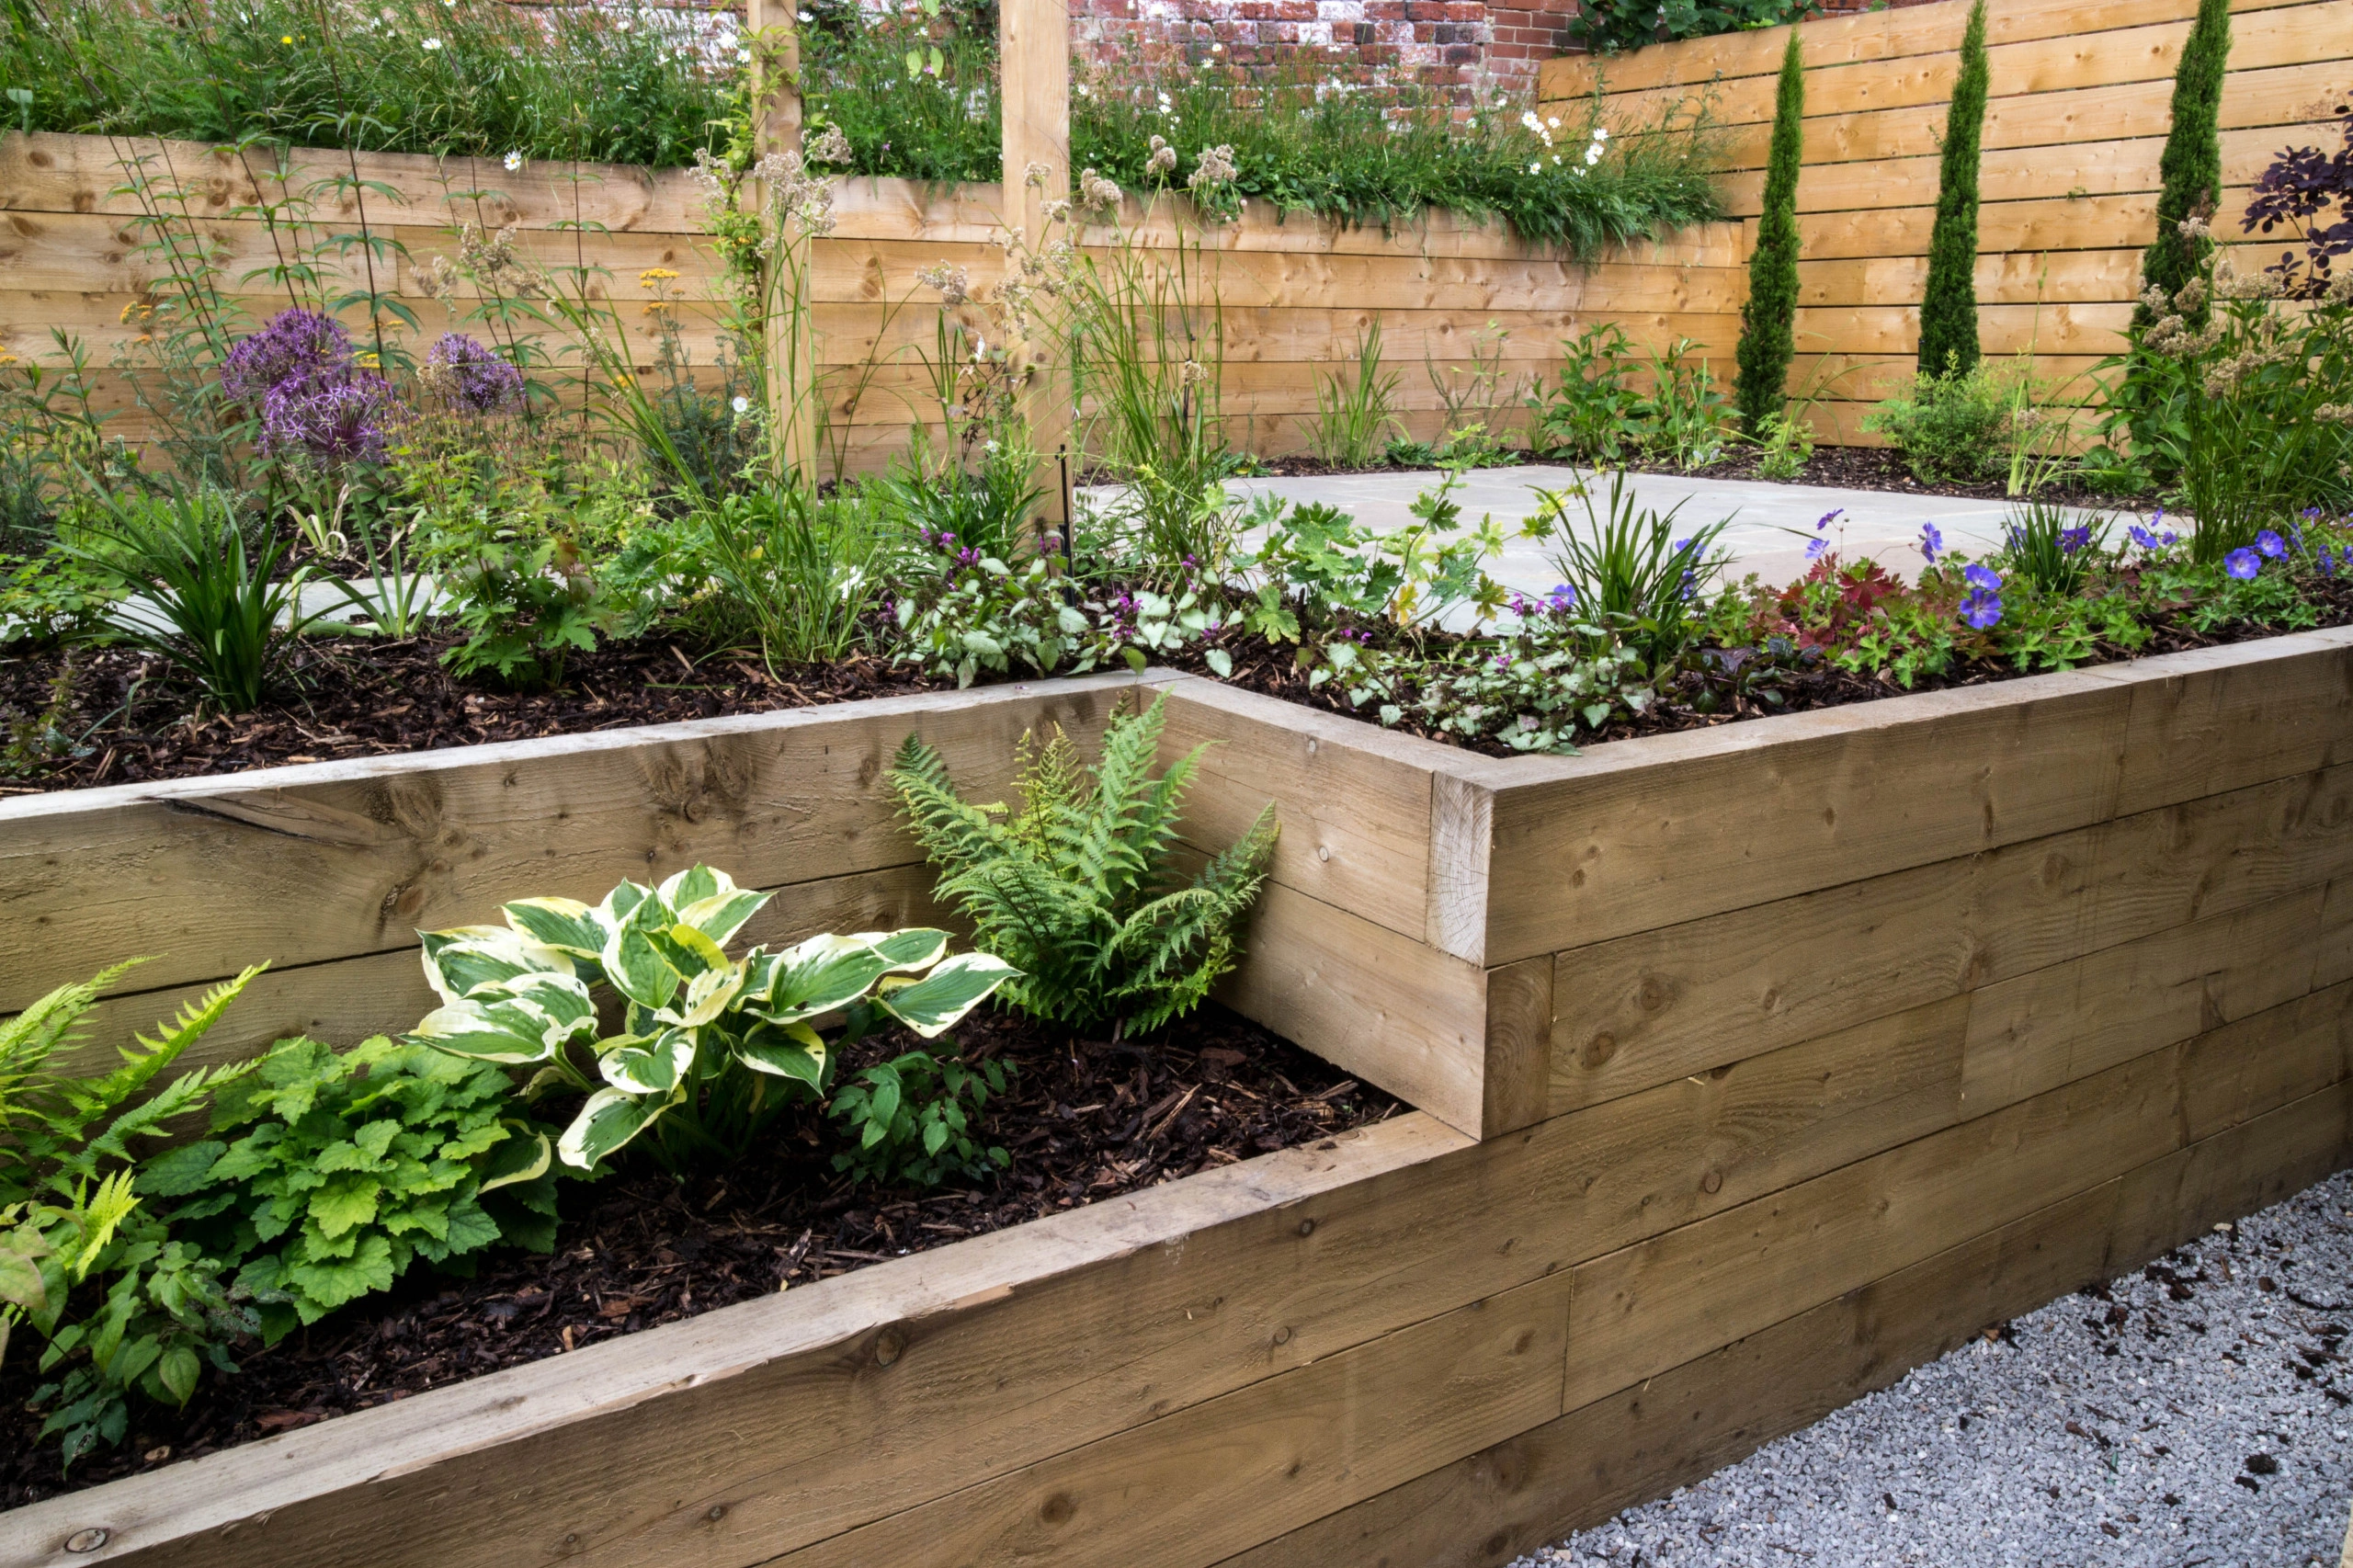 Elevate your garden with raised garden sleepers, adding dimension and style to your outdoor space.